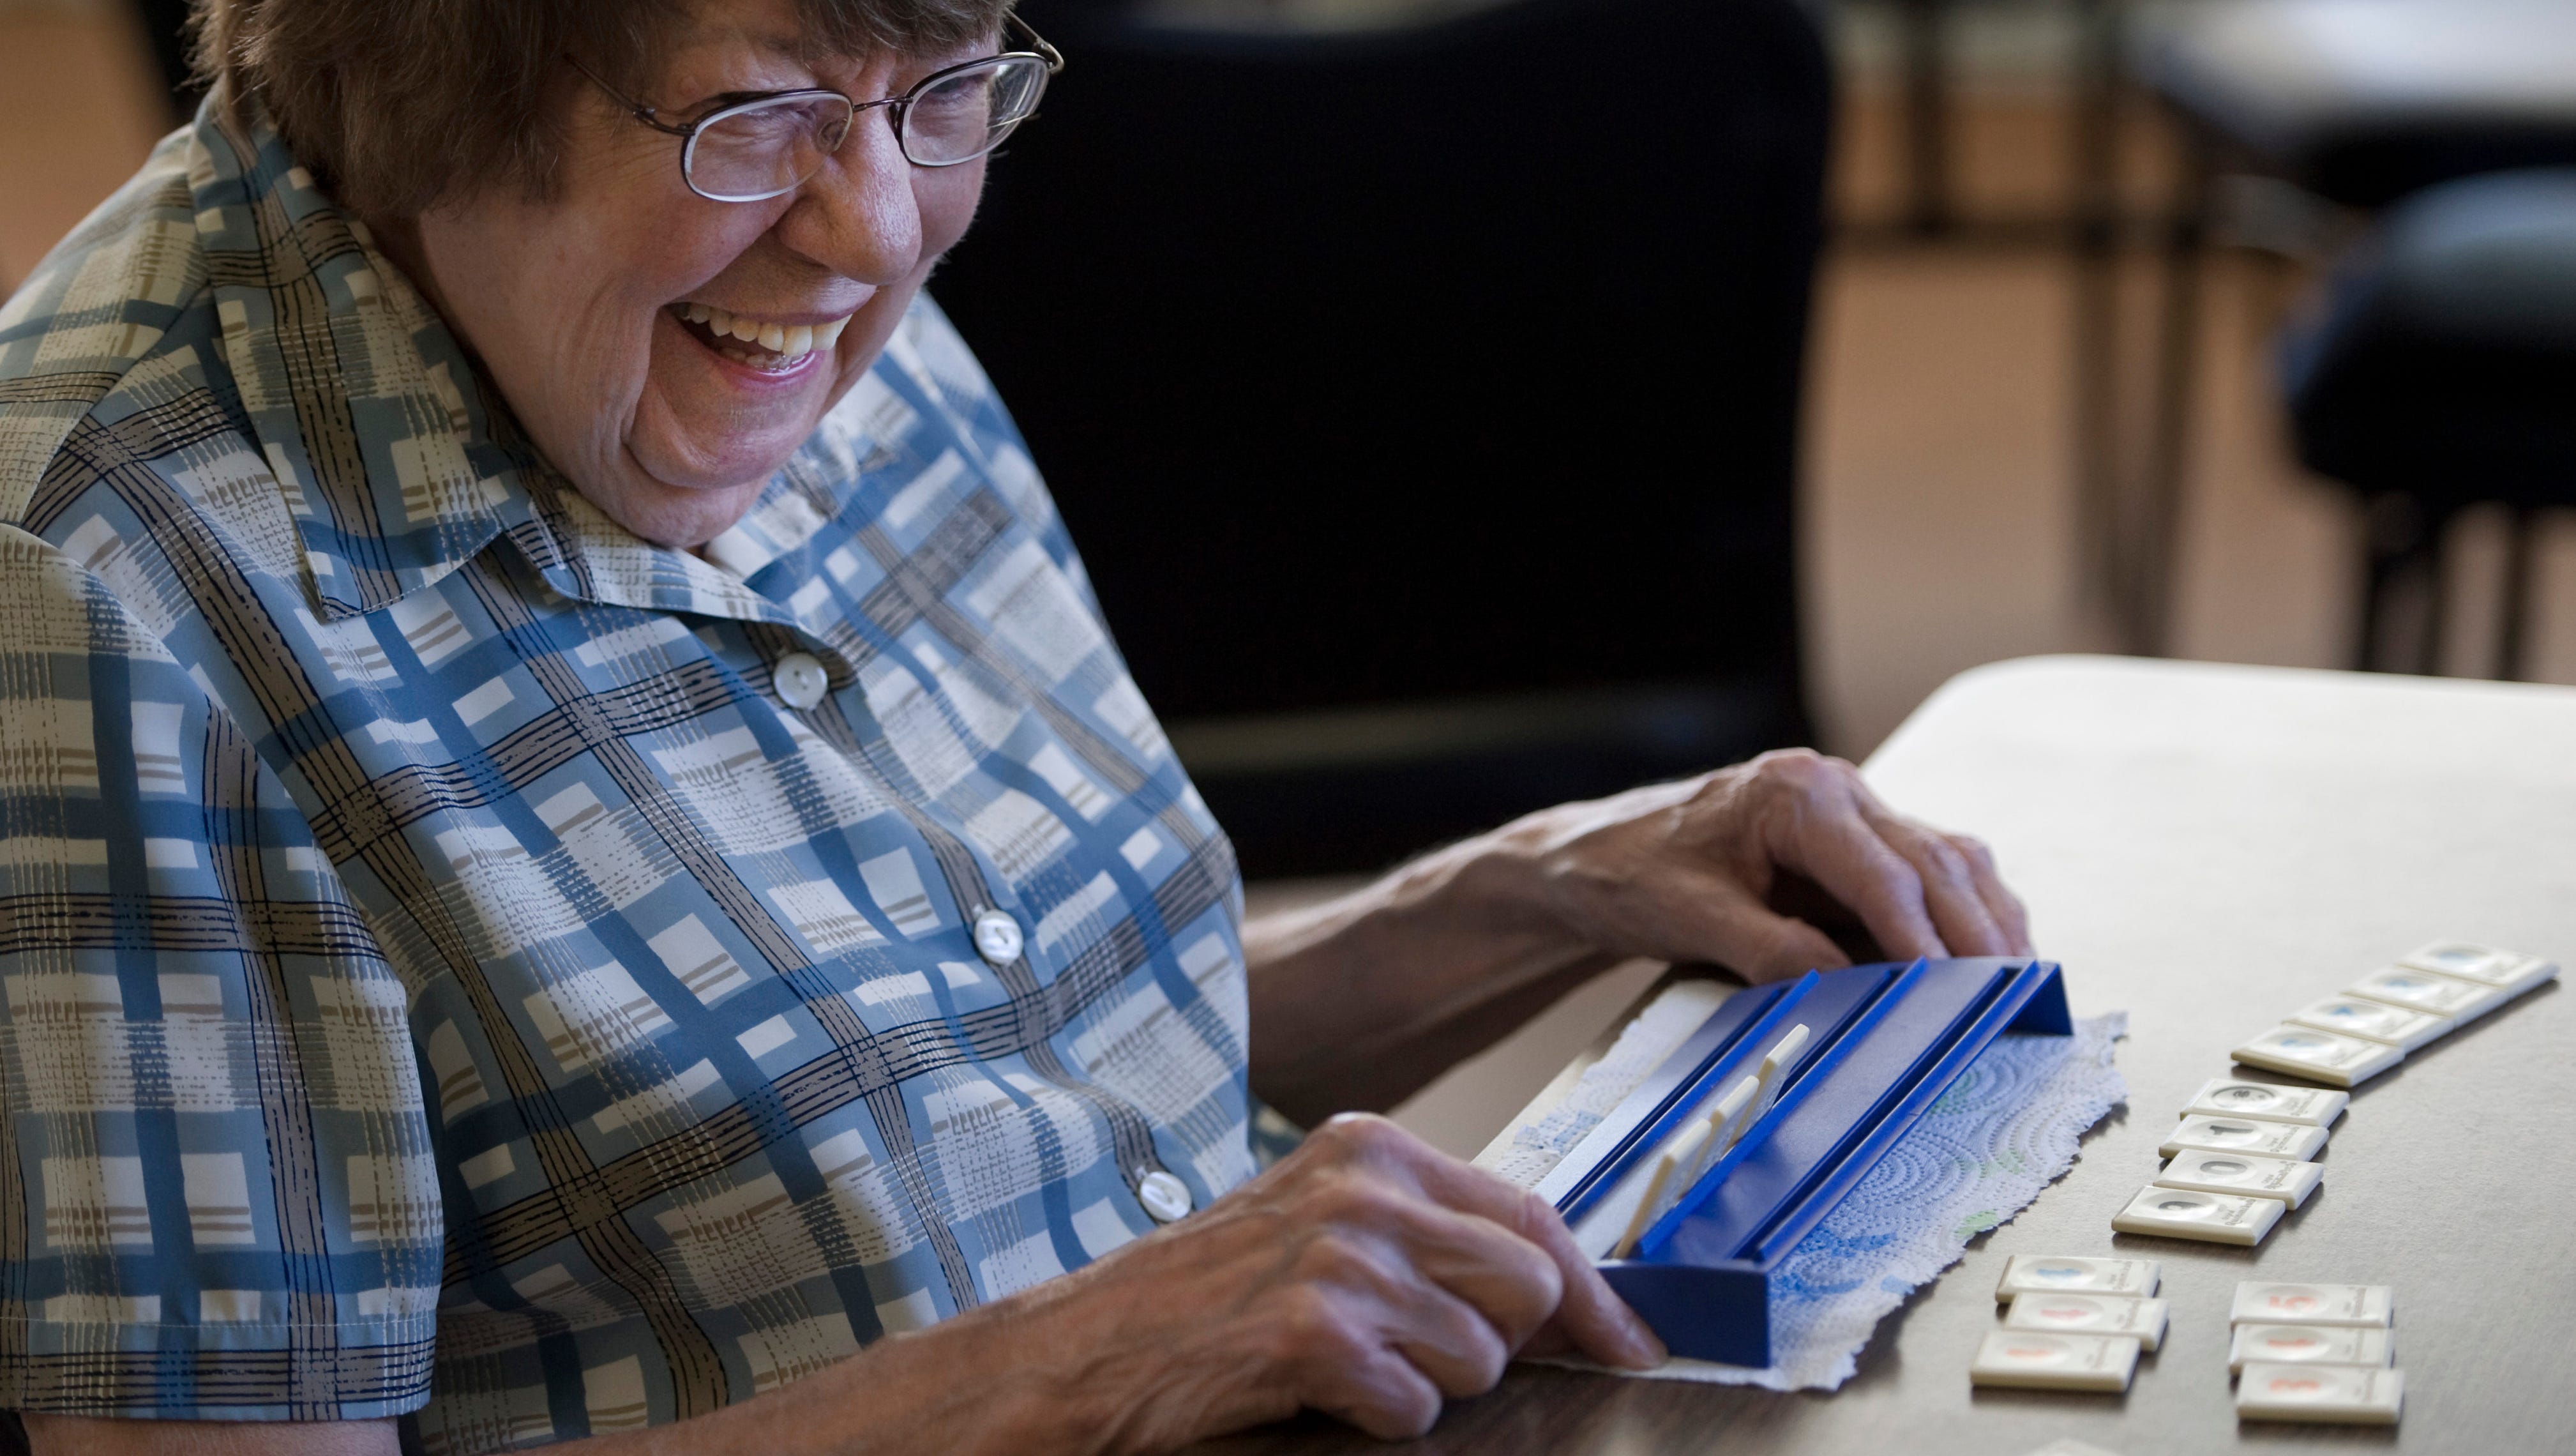 Highways & Byways: Glory at stake in senior citizens' game of Rummikub